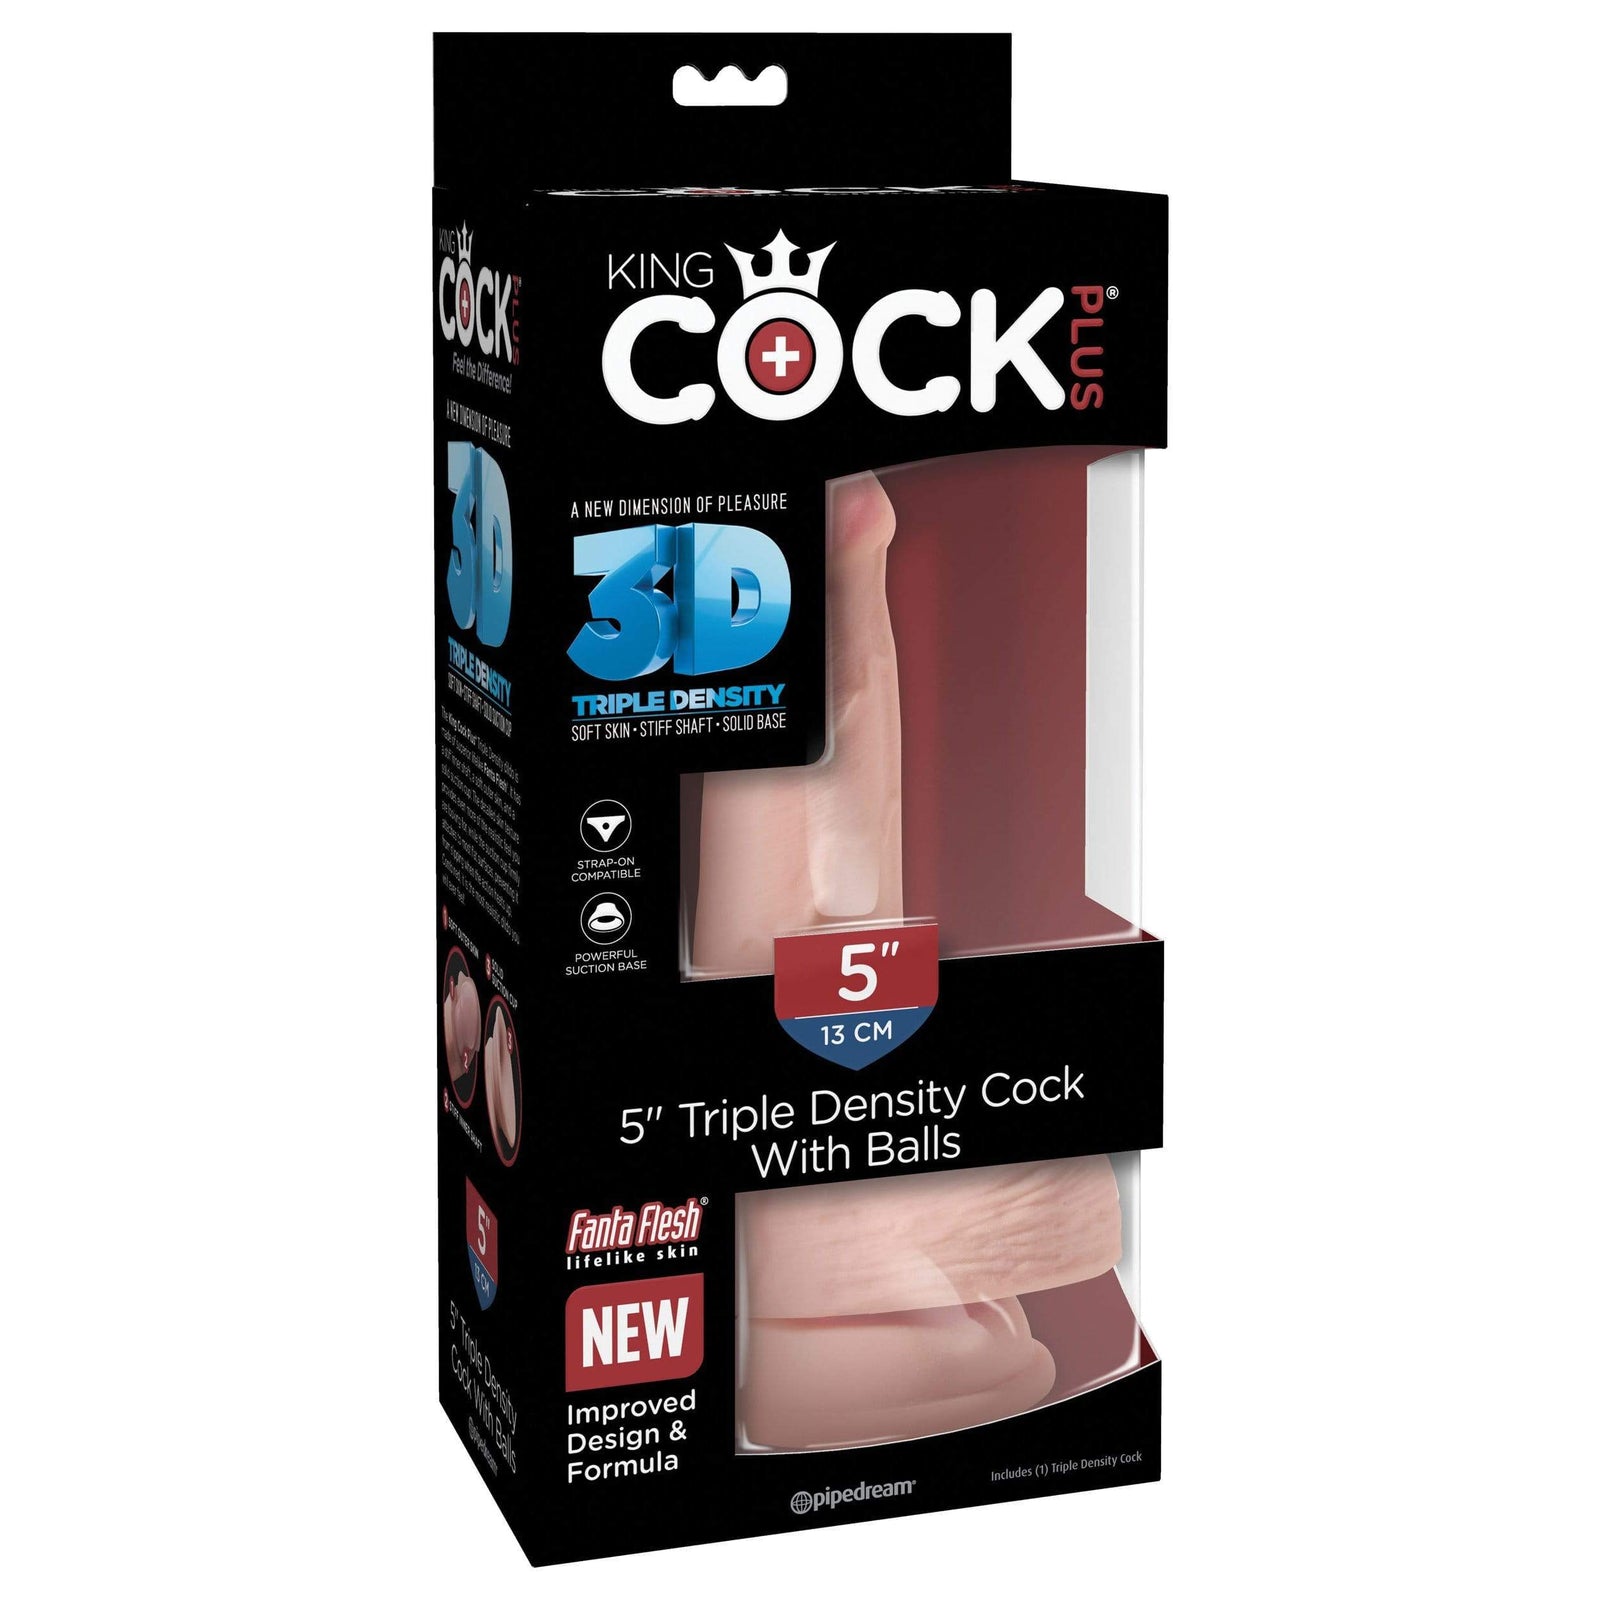 Pipedream - King Cock Plus 3D Triple Density Cock with Balls Dildo 5" (Beige) Realistic Dildo with suction cup (Non Vibration) 603912762679 CherryAffairs